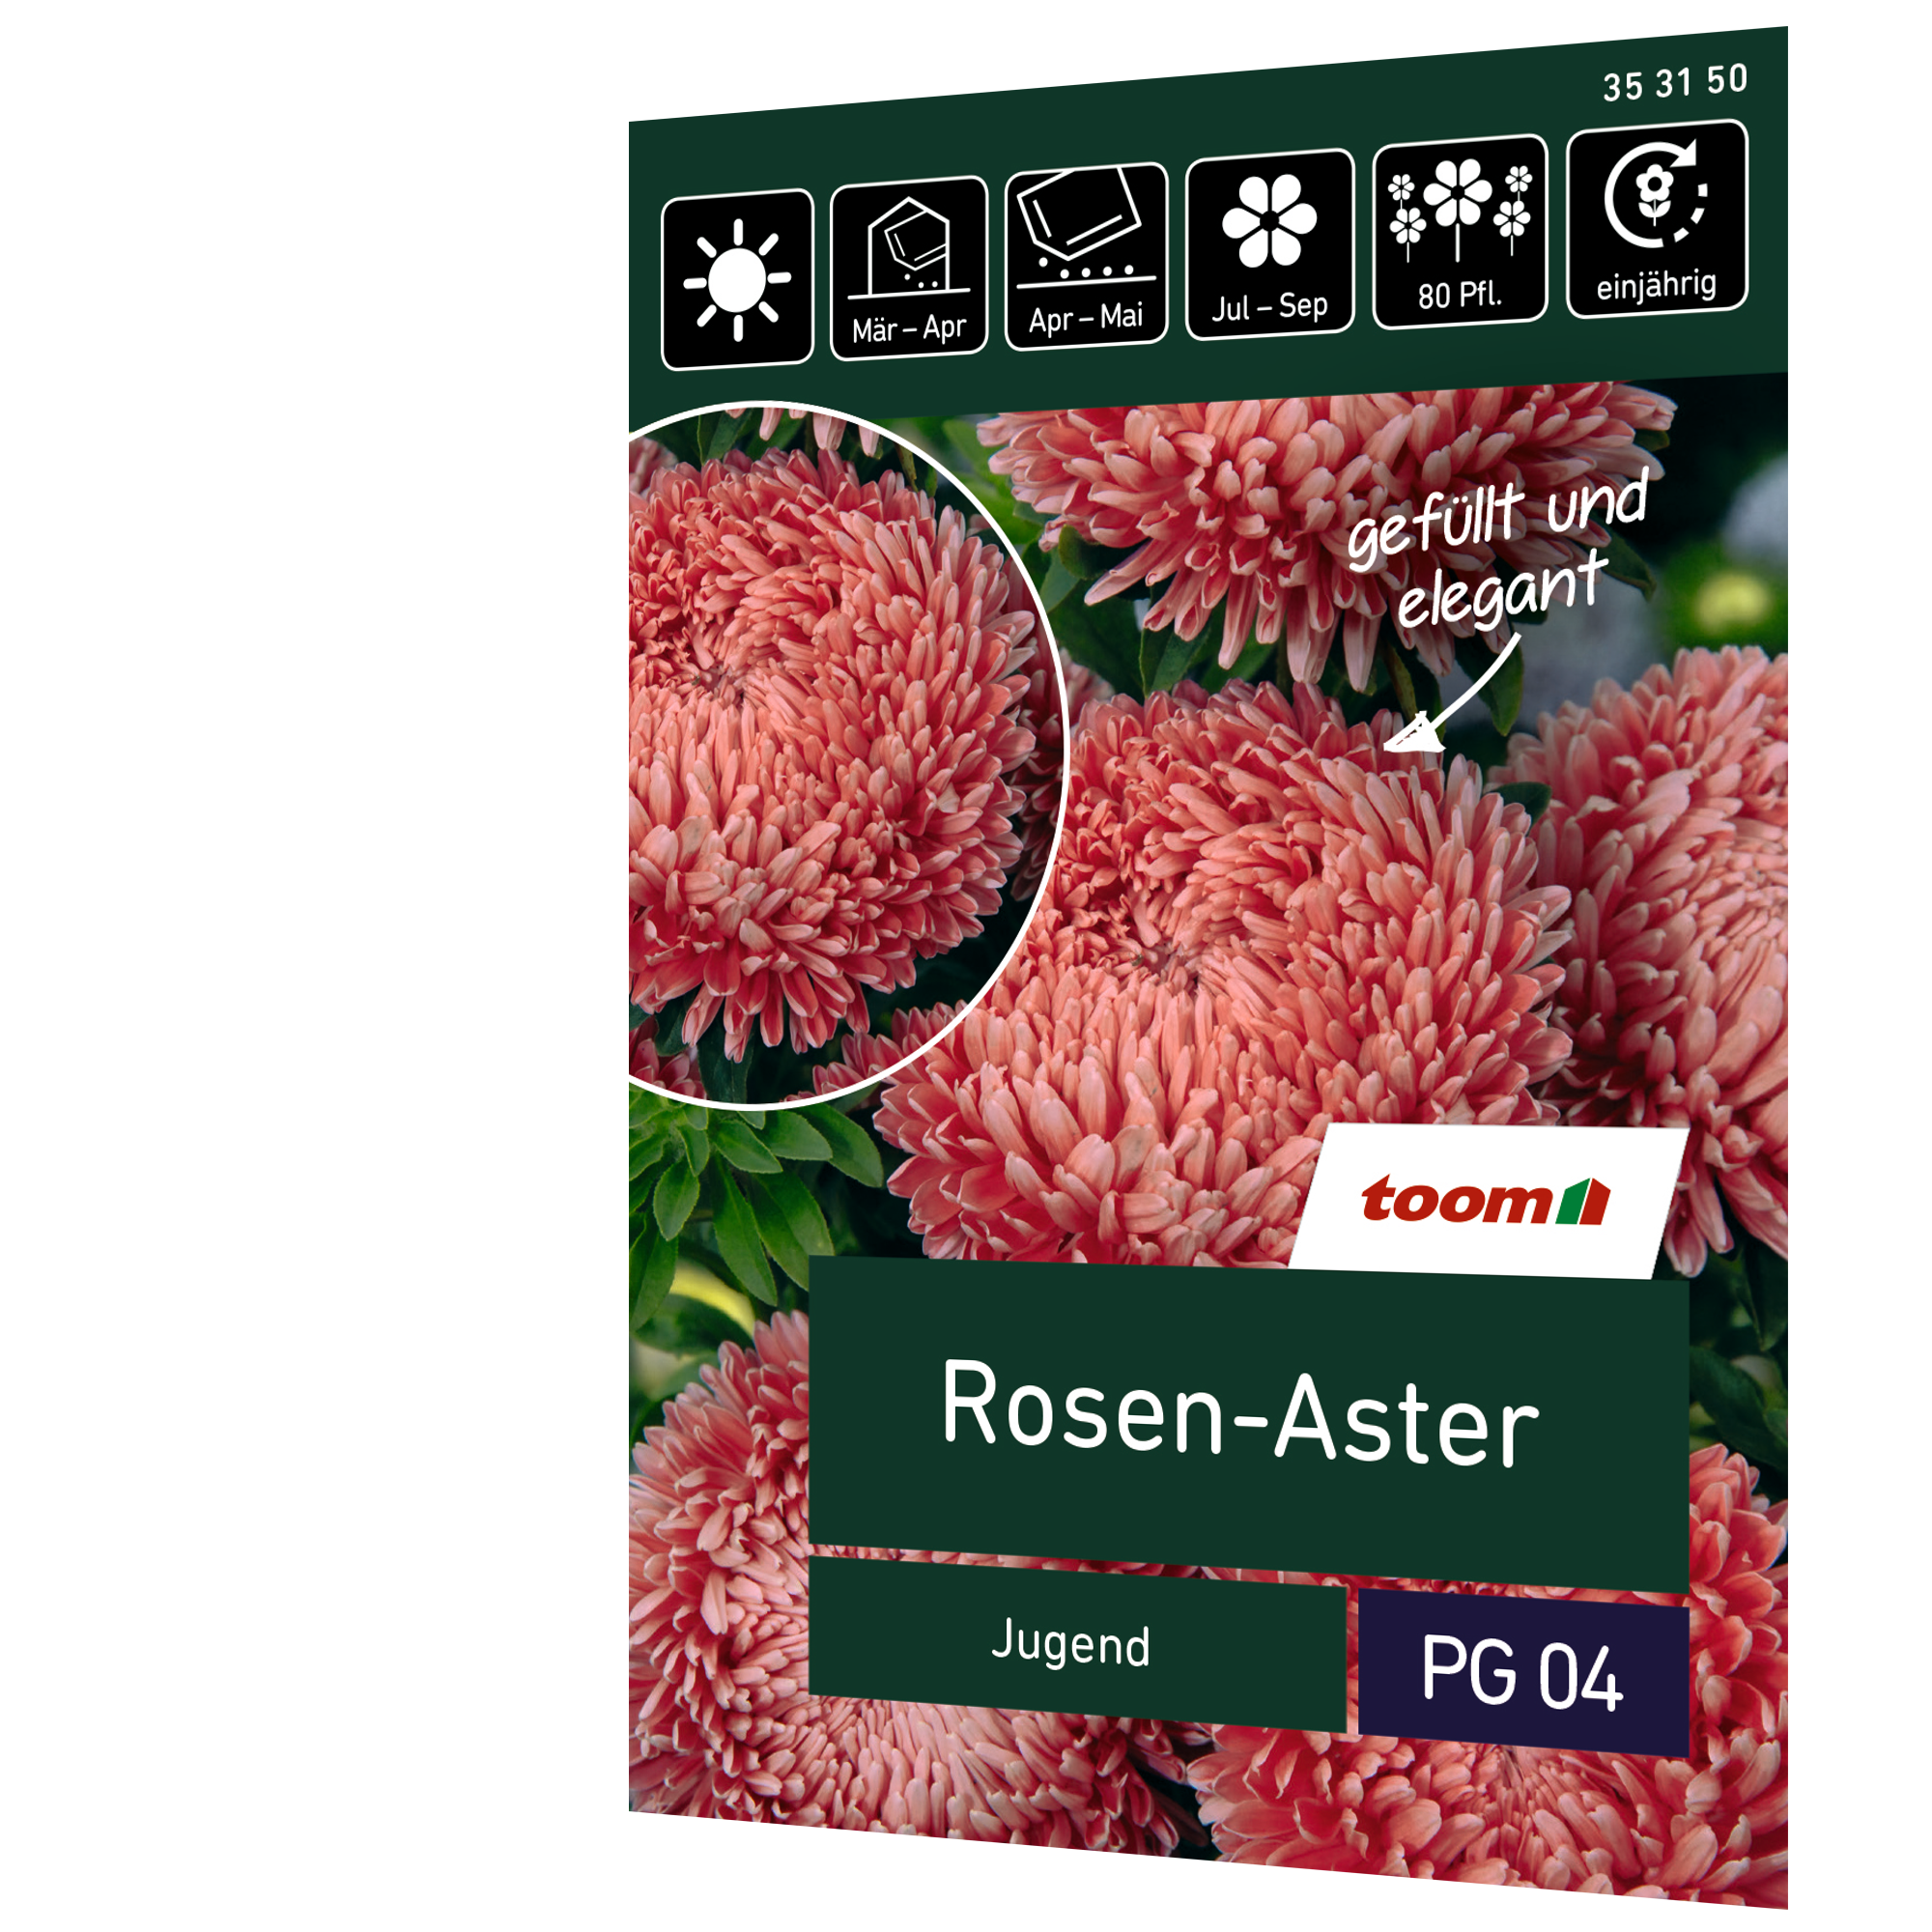 Rosen-Aster 'Jugend' + product picture